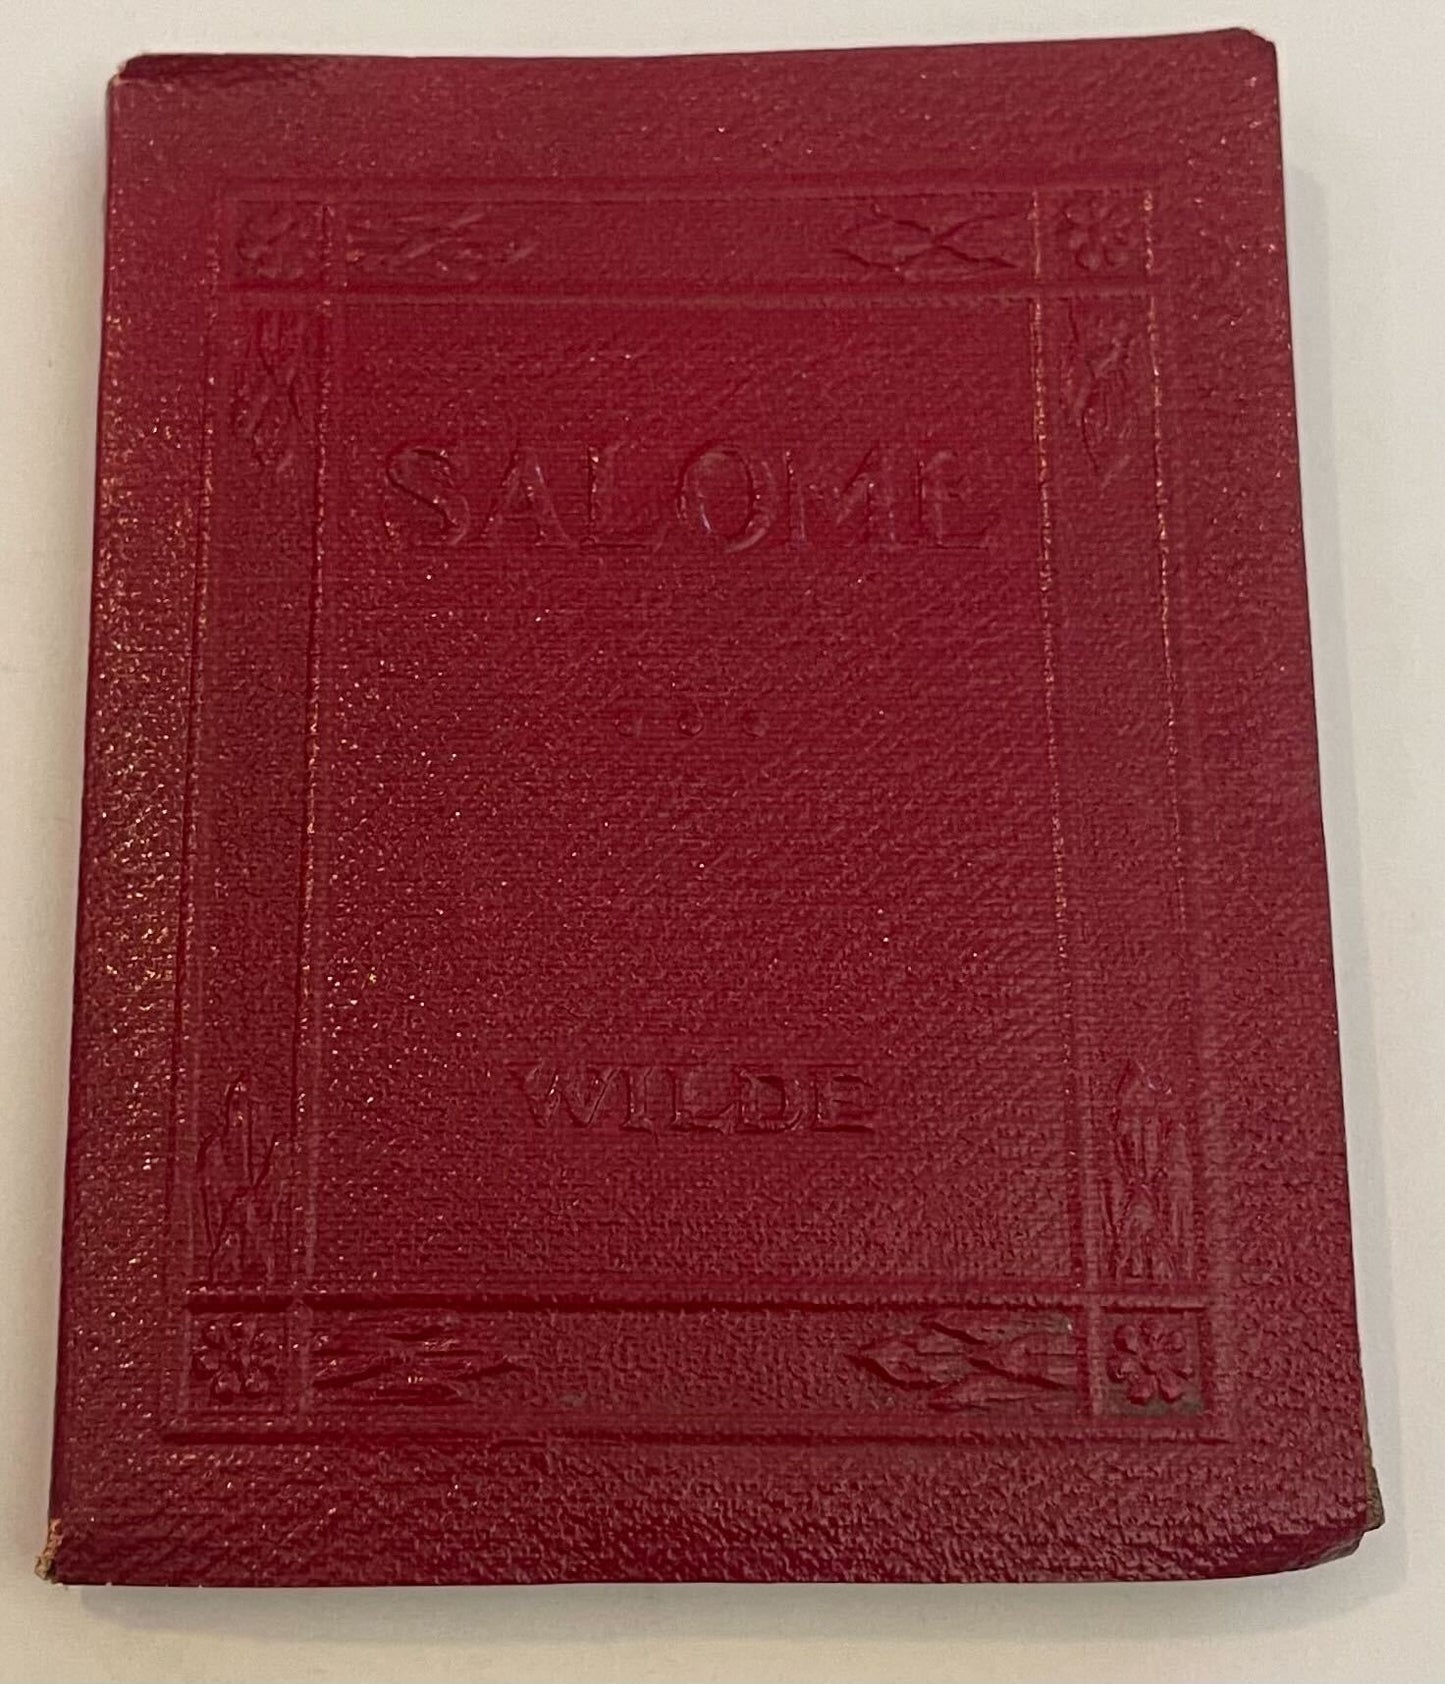 Vintage Red Books (Little Lunary Library)